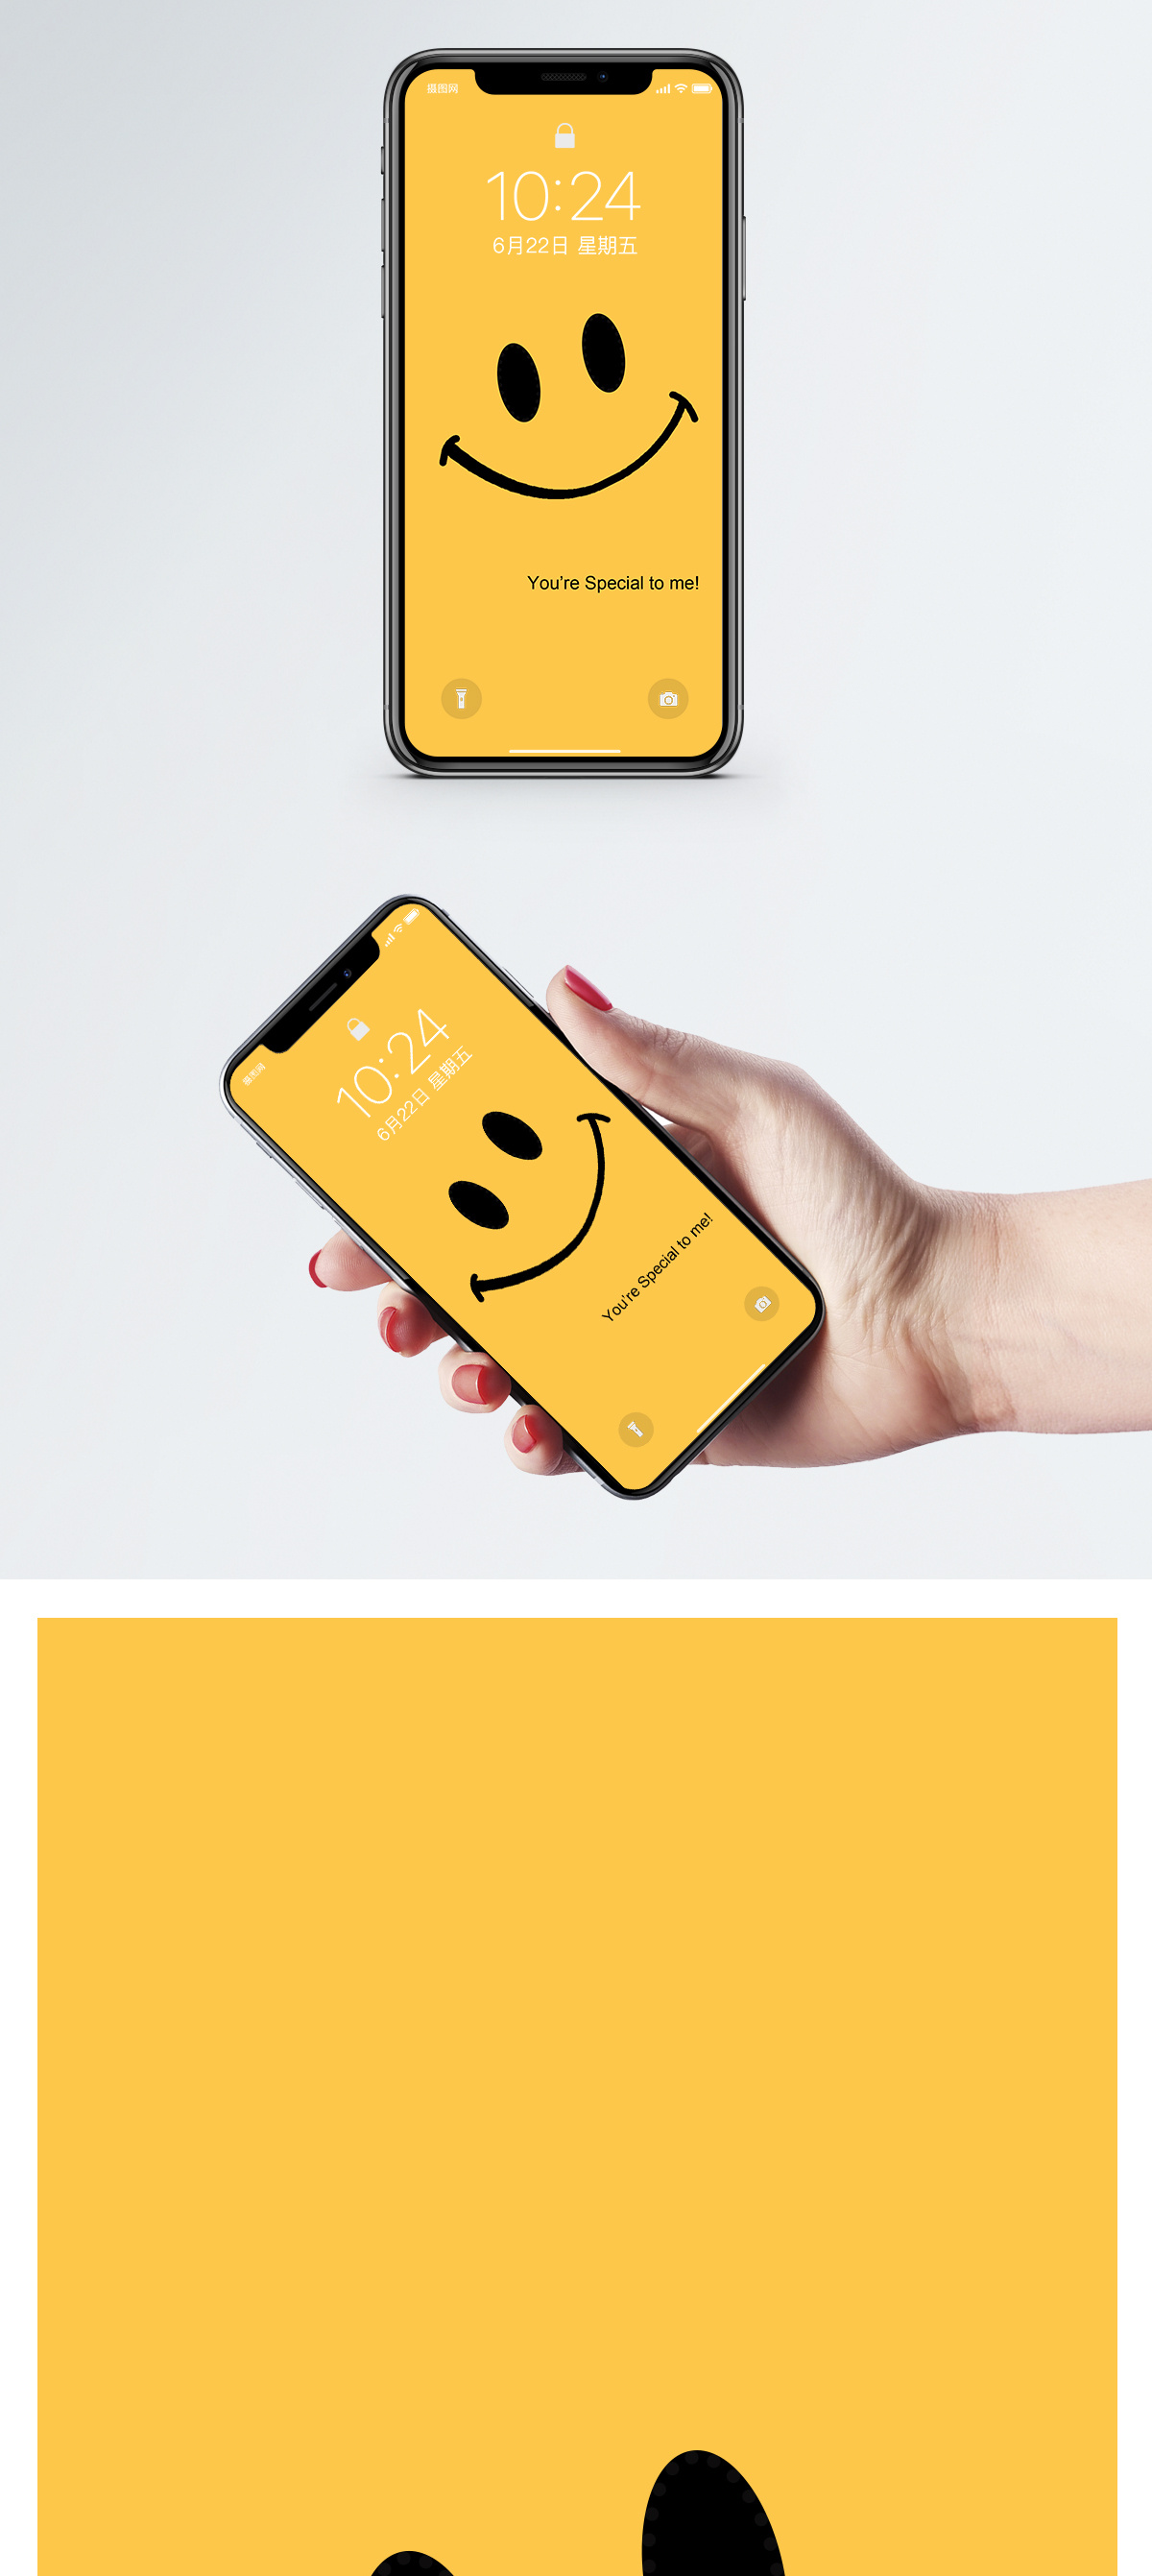 Download Free 89907 Yellow Pictures Yellow All Stock Images Lovepik Com SVG Cut Files